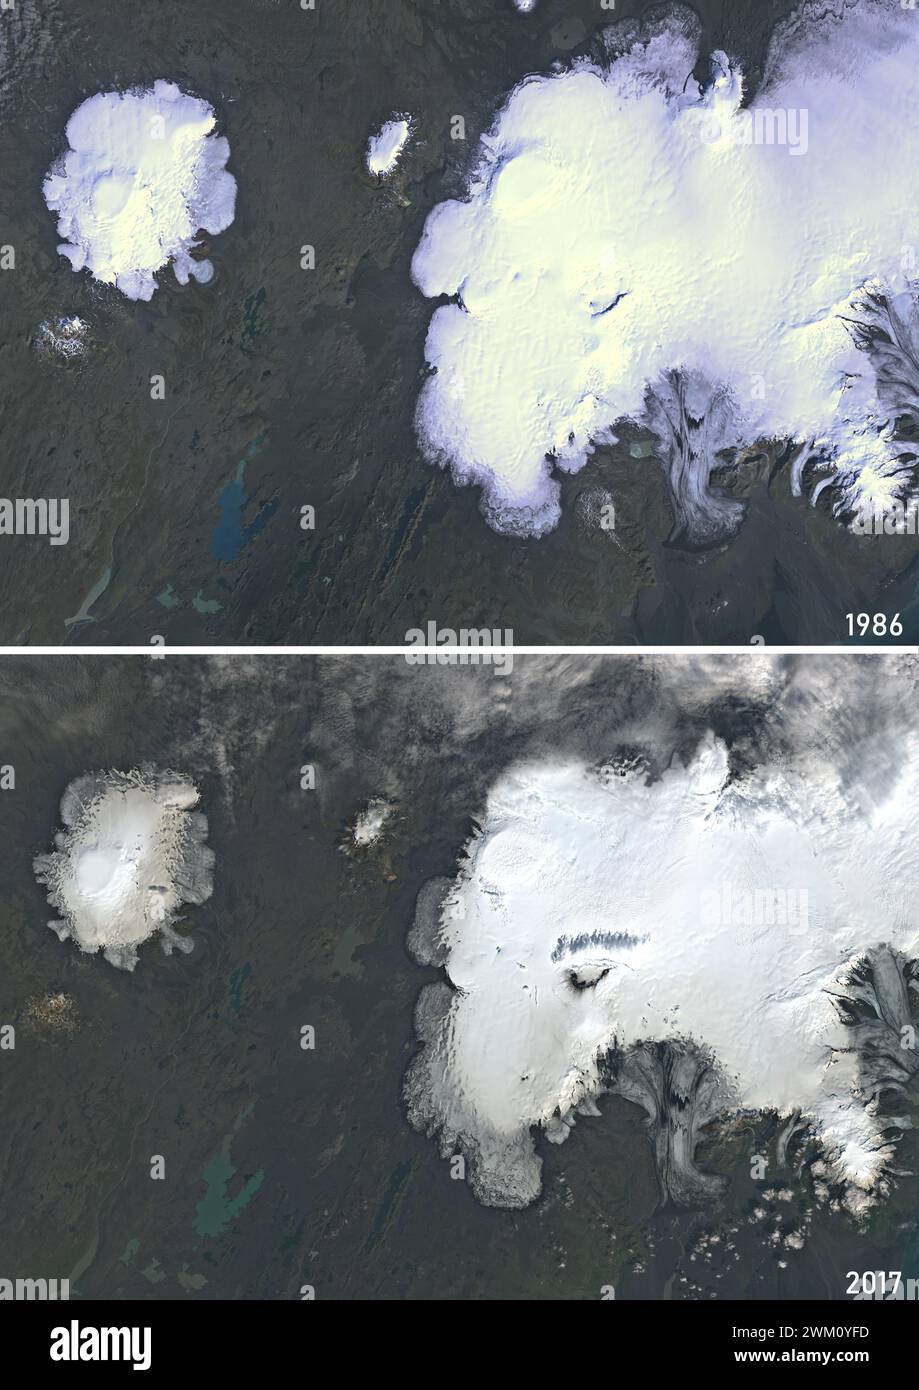 Color satellite image of Vatnajokull Glacier, Iceland in 1986 and 2017. It is the largest and most voluminous ice cap in Iceland, and the second largest in area in Europe. The satellite image shows how the glacier has been melting over the years. Stock Photo